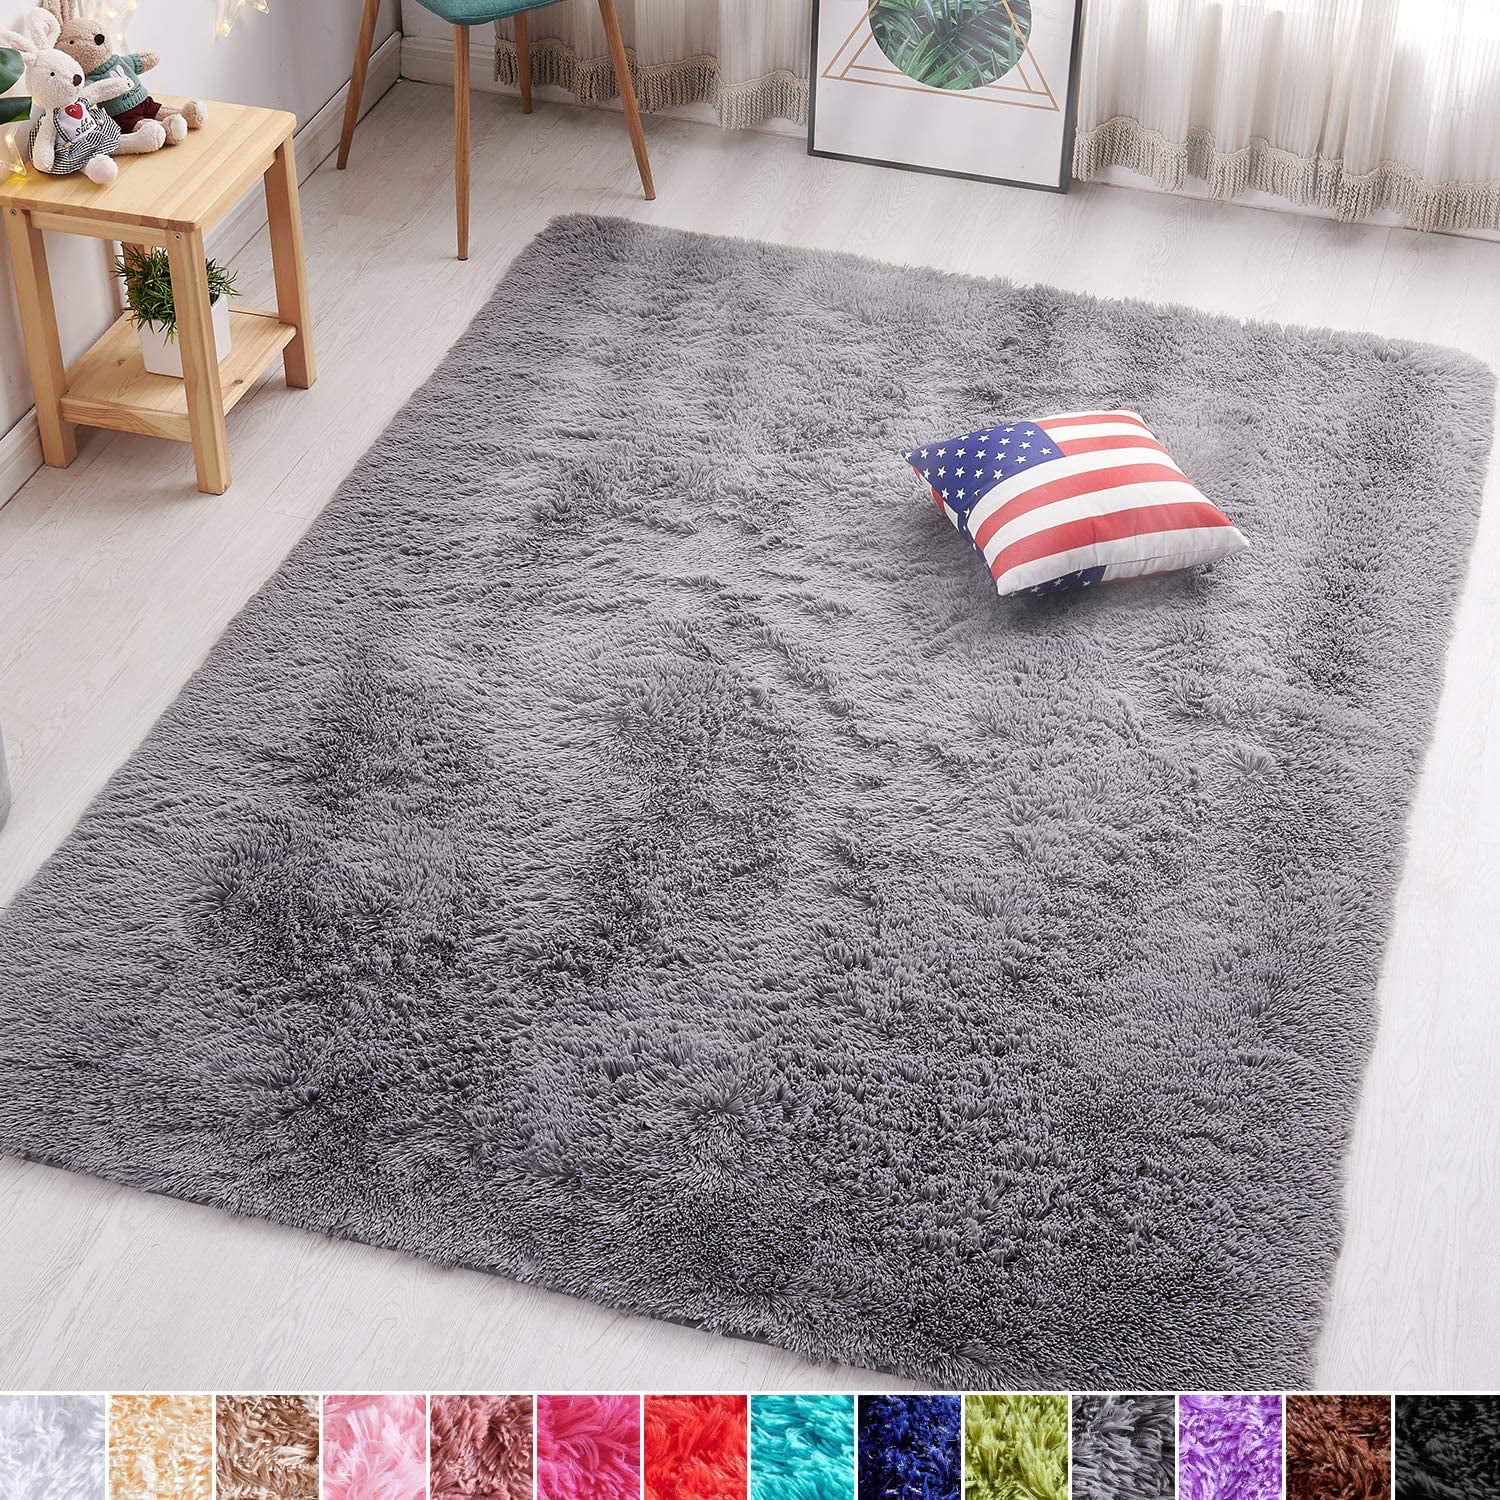 PAGISOFE Black Fluffy Shag Area Rugs for Bedroom 3x5 Soft Fuzzy Shaggy Rugs for 